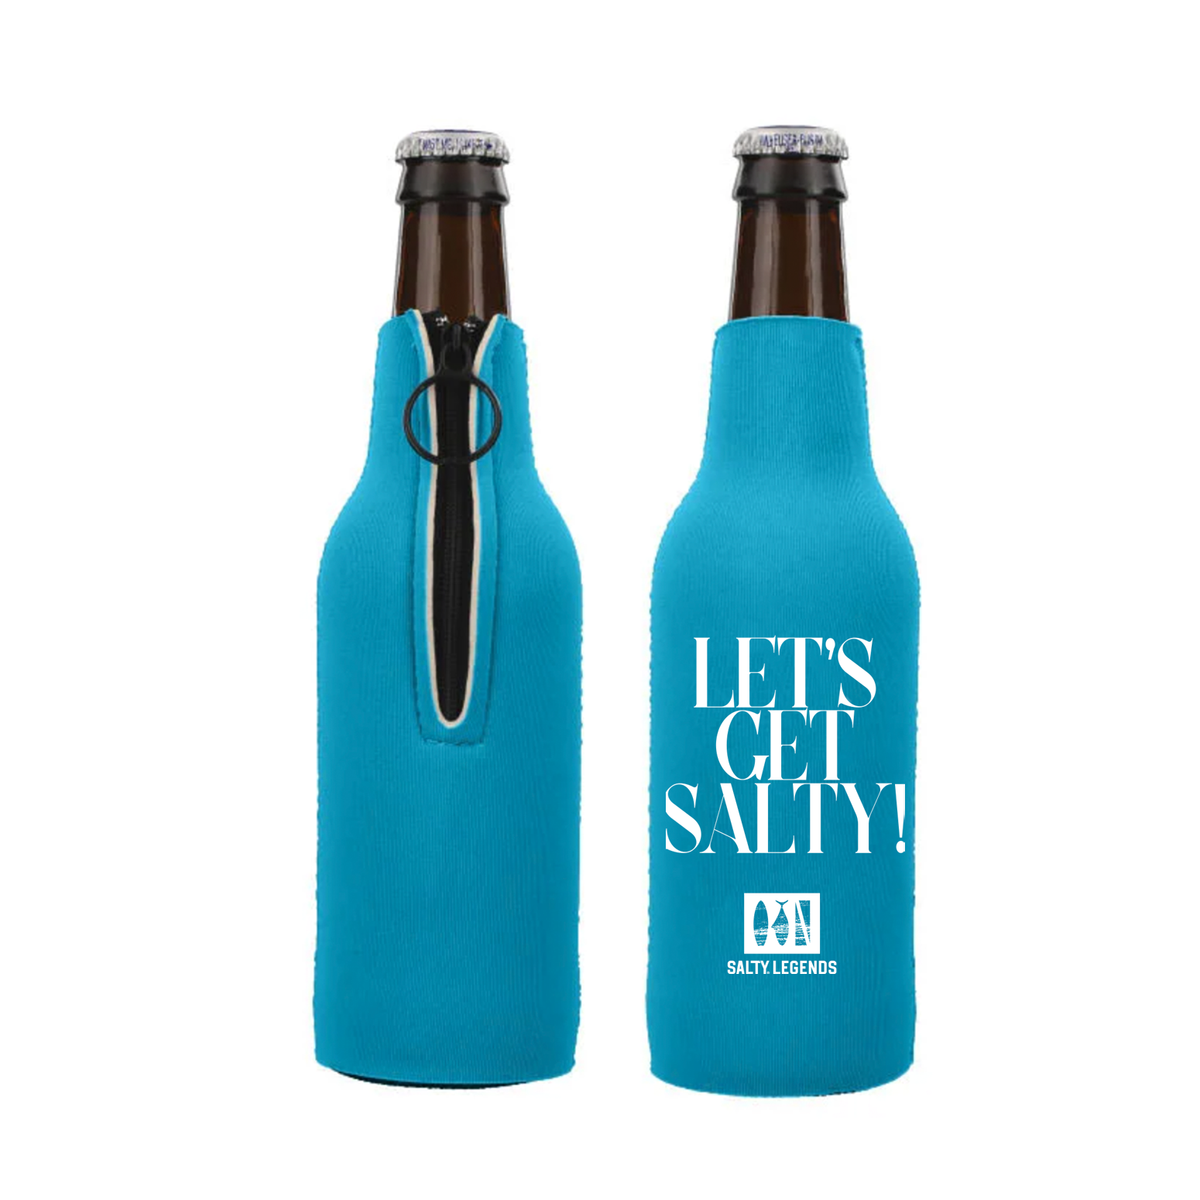  LOGOBRANDS Unisex Adult Bottle Drink Coozie, One Size,  Multicolor : Sports Fan Cold Beverage Koozies : Sports & Outdoors